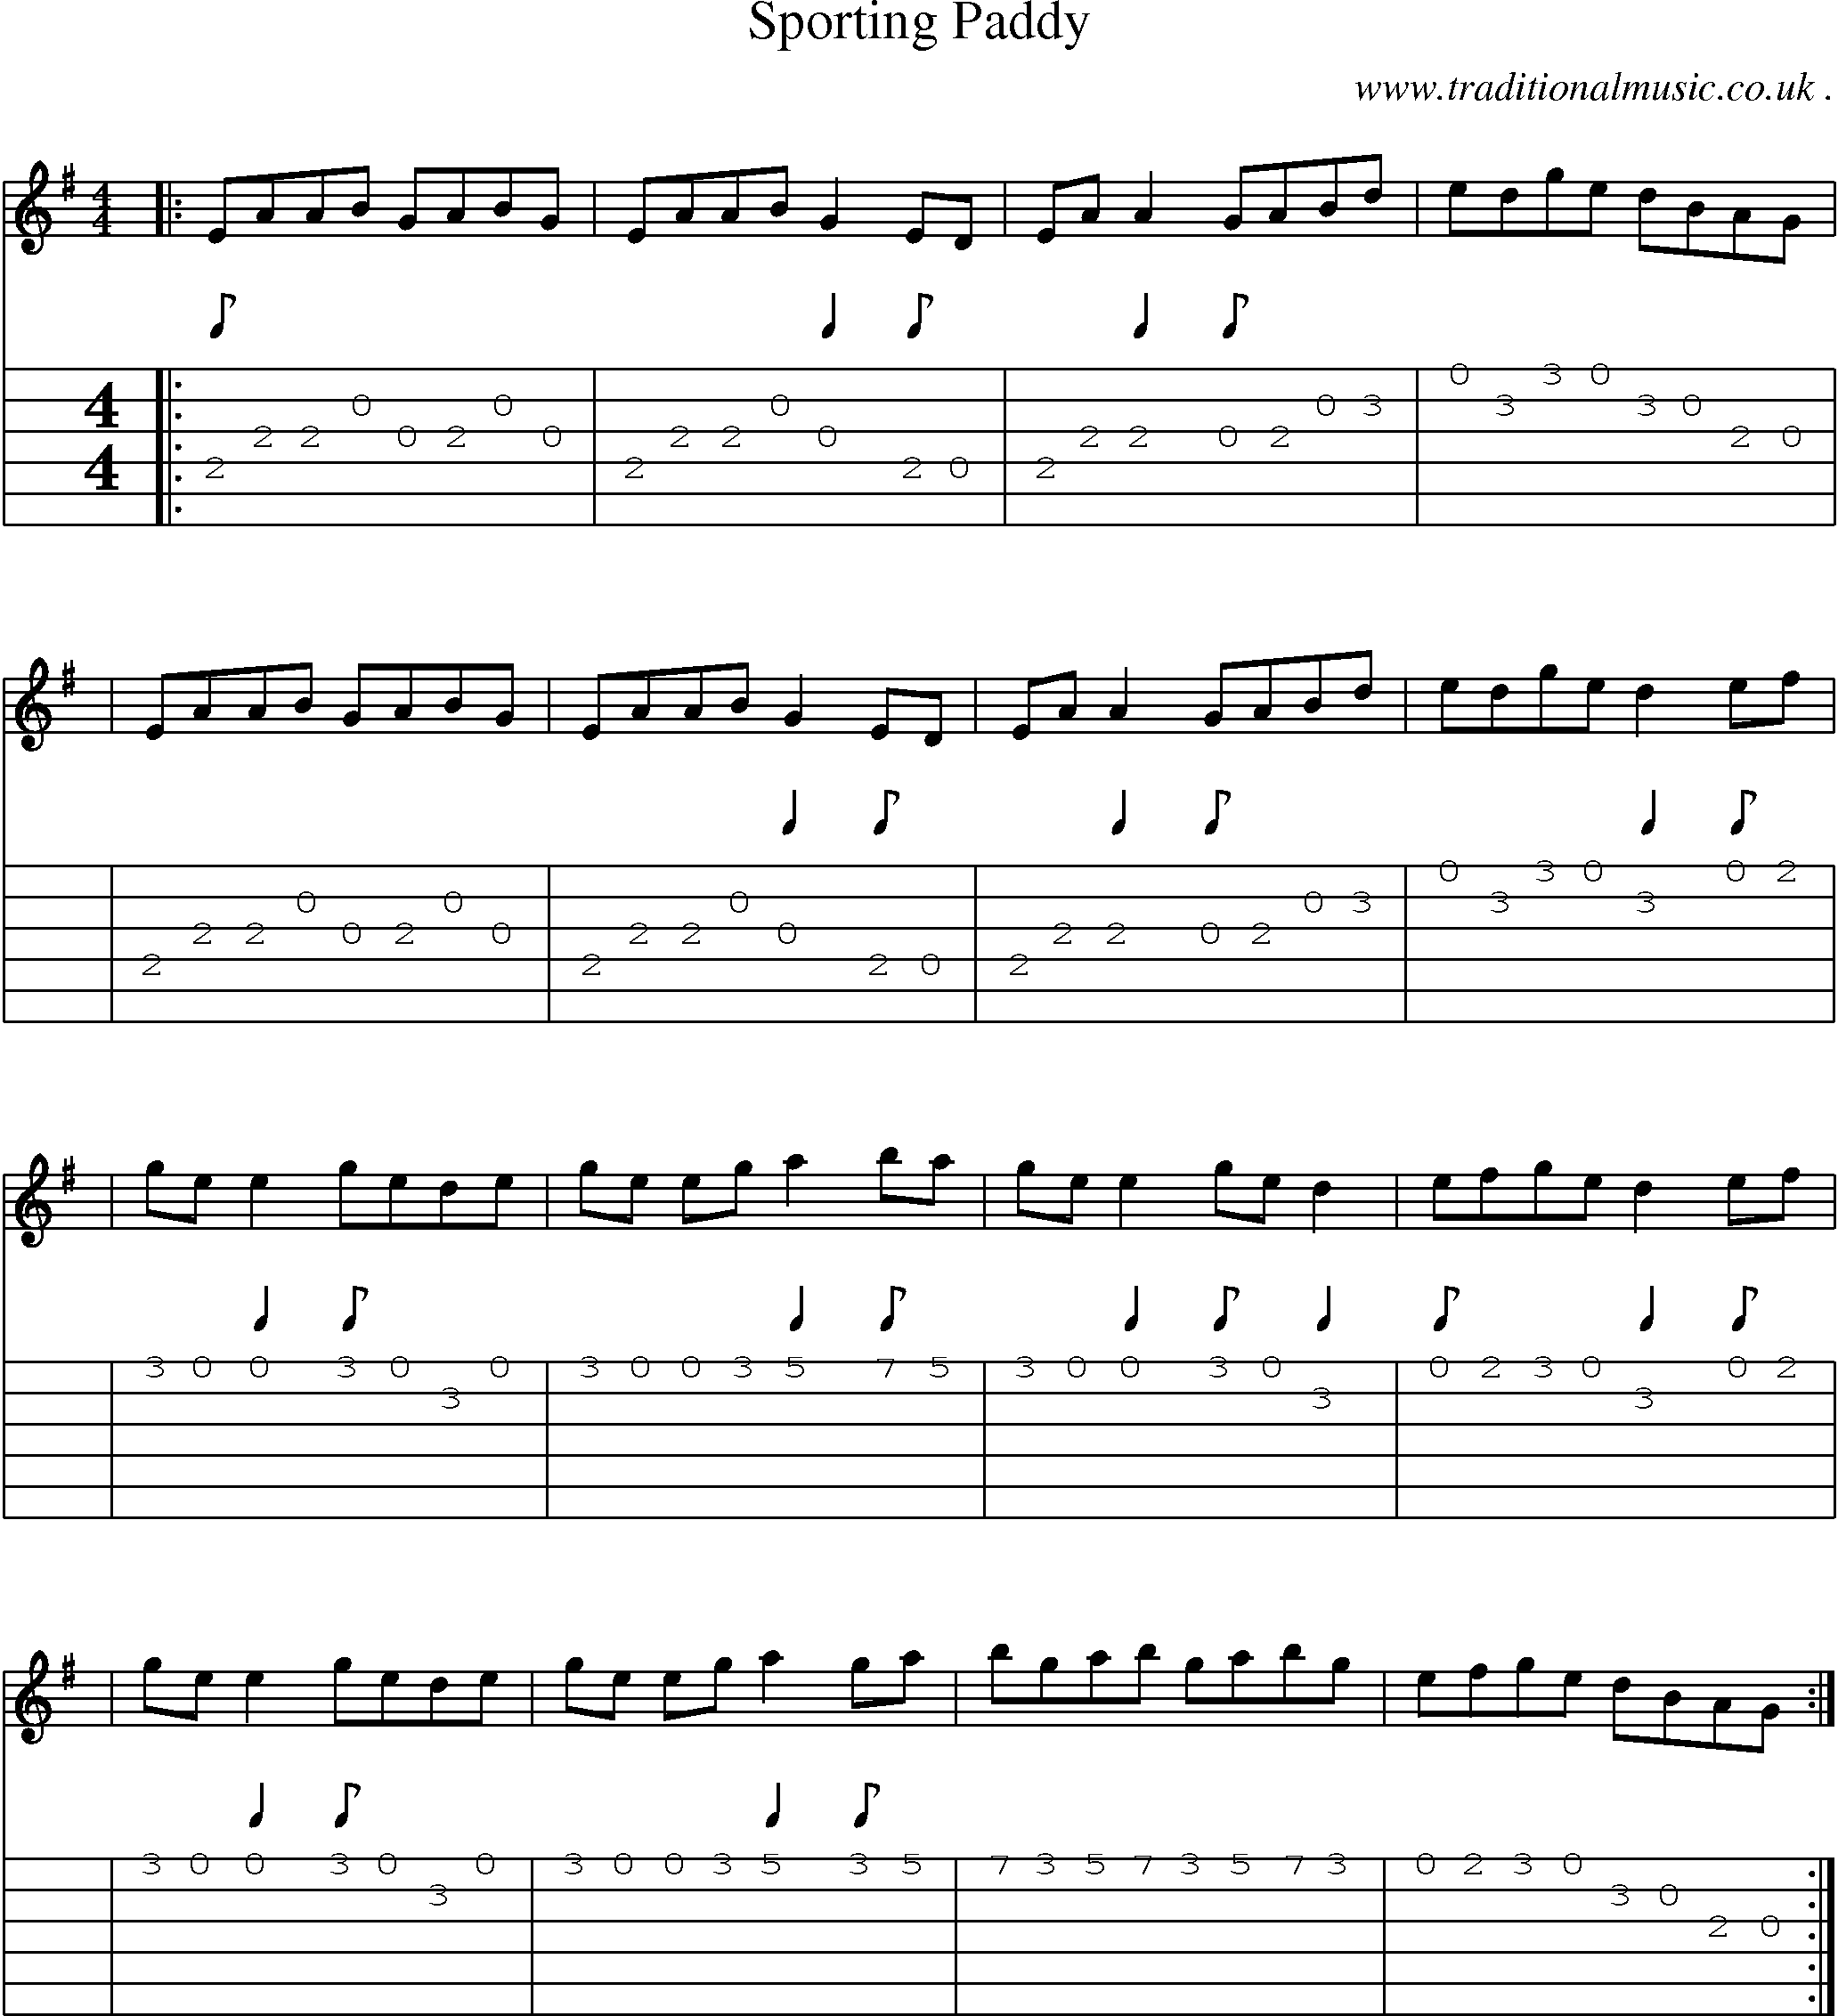 Sheet-Music and Guitar Tabs for Sporting Paddy